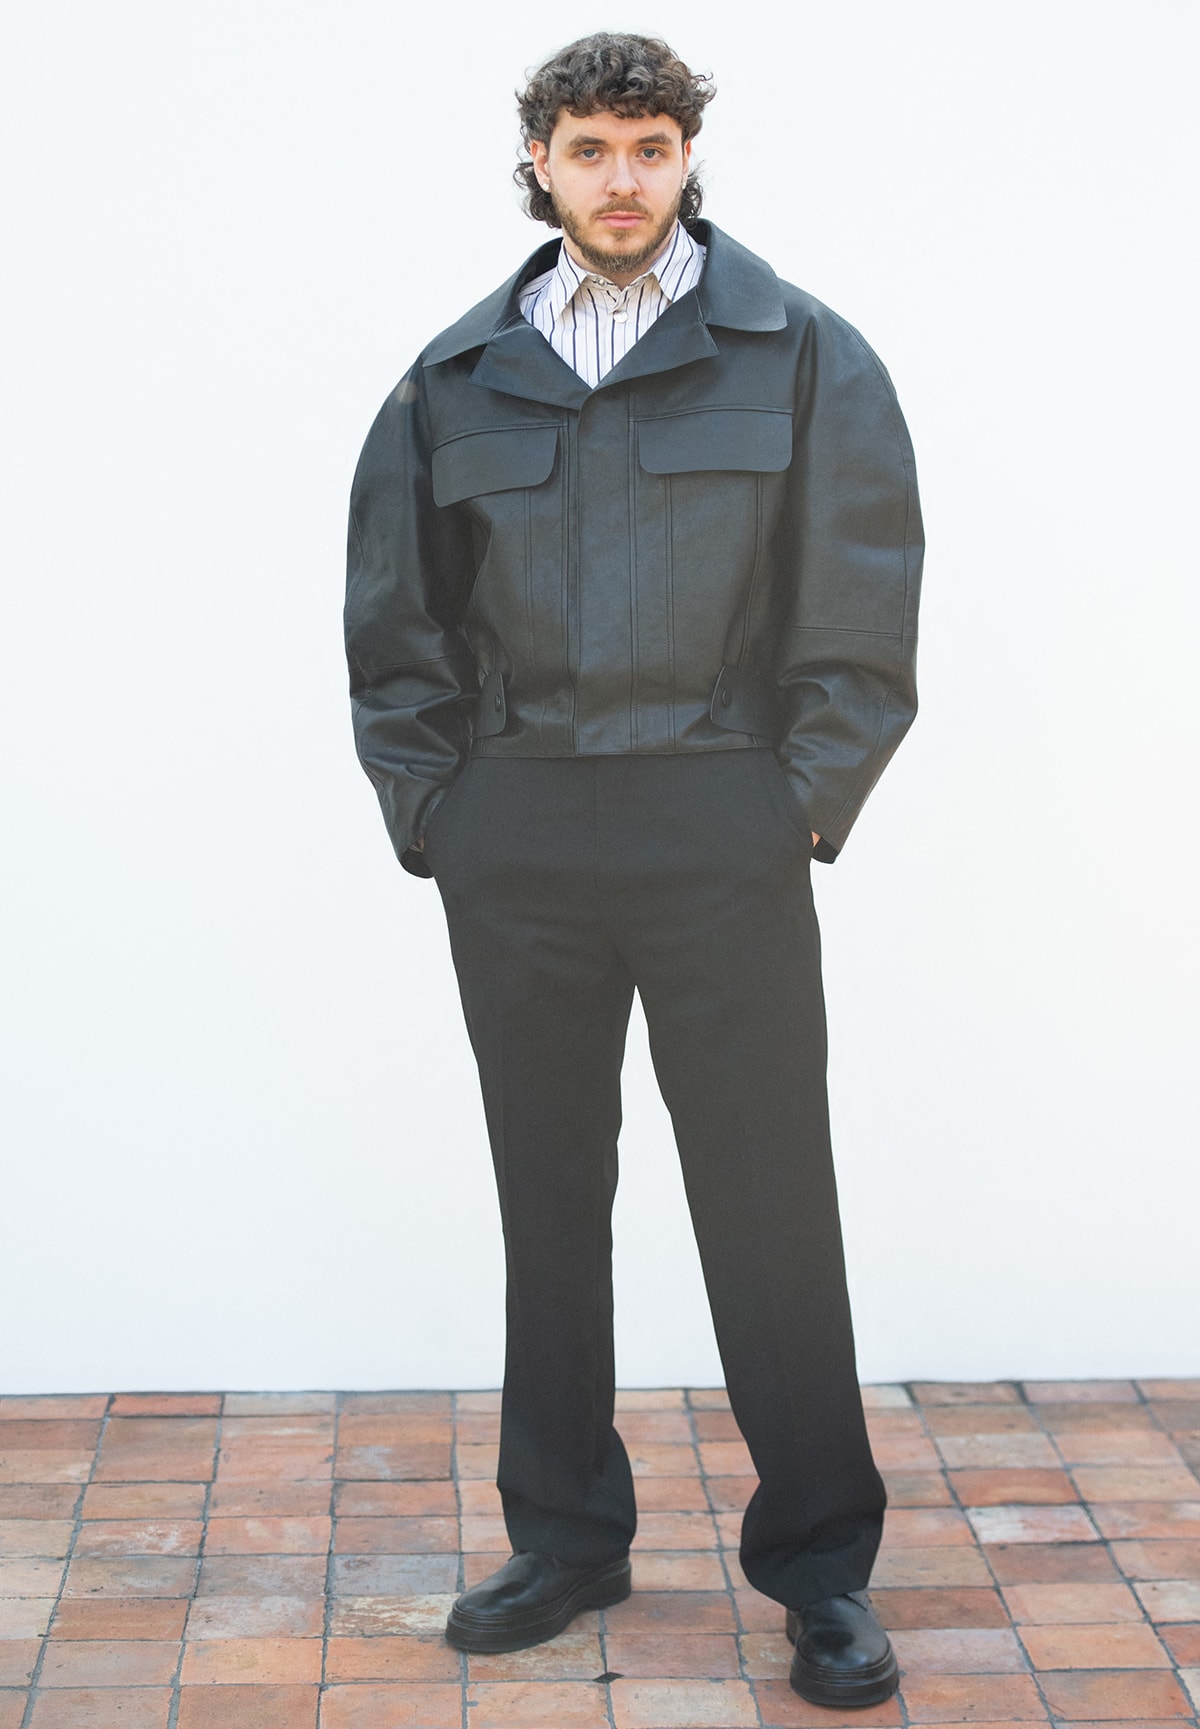 Jack Harlow looks stylish in an oversized black leather jacket, a pinstripe shirt, black trousers, and black loafers